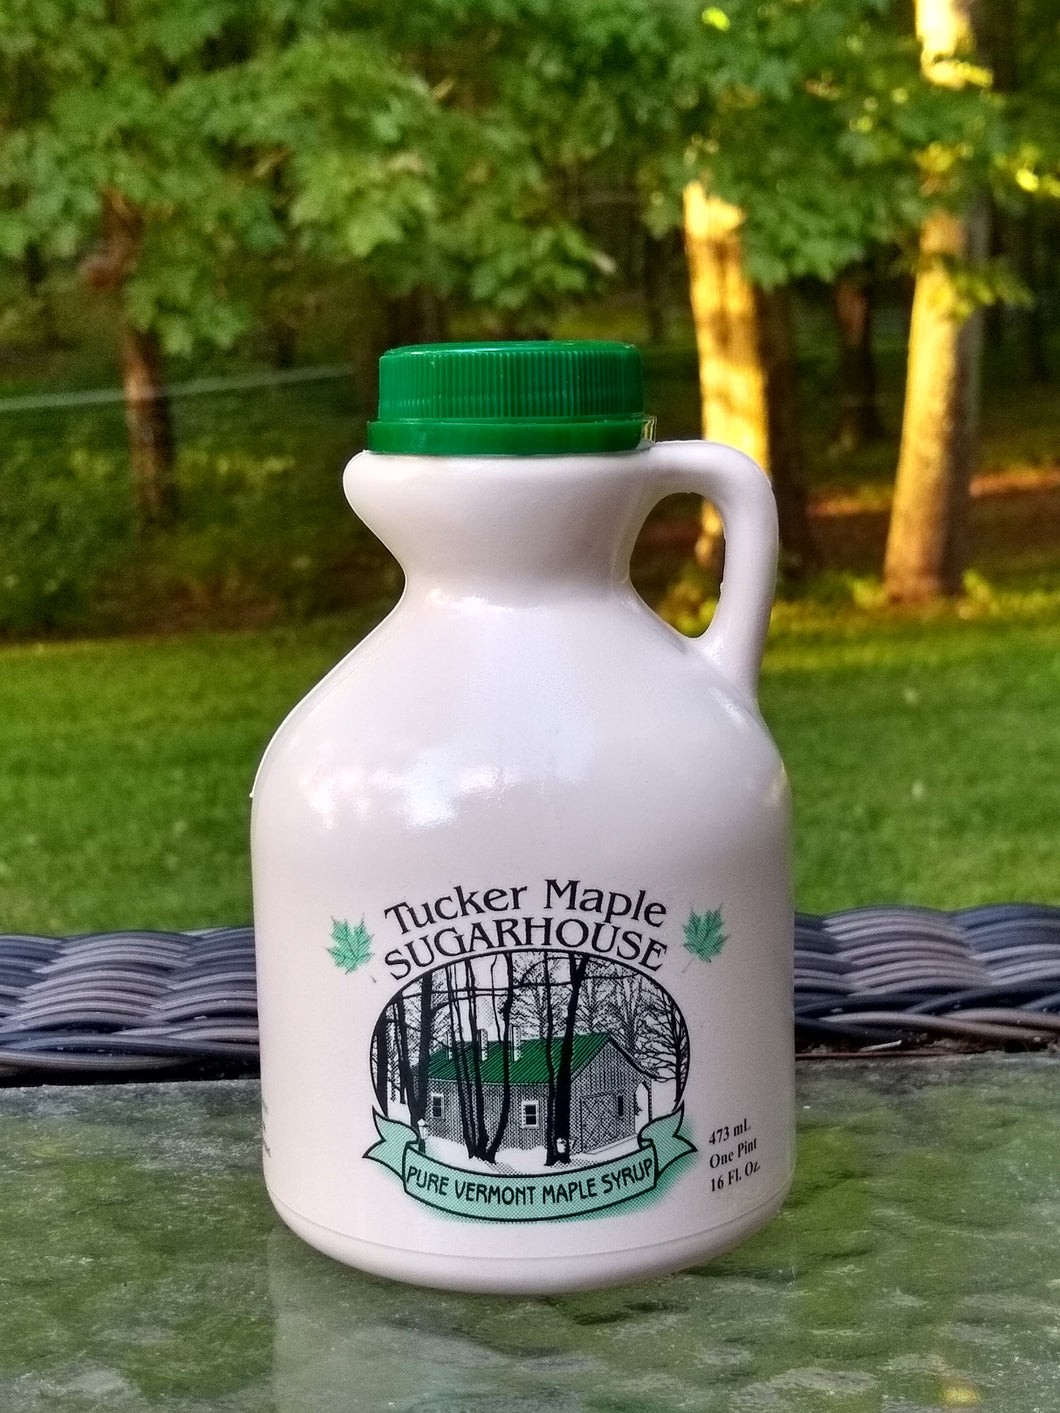 Pure Vermont Maple Syrup in jug made by Tucker Maple Sugarhouse